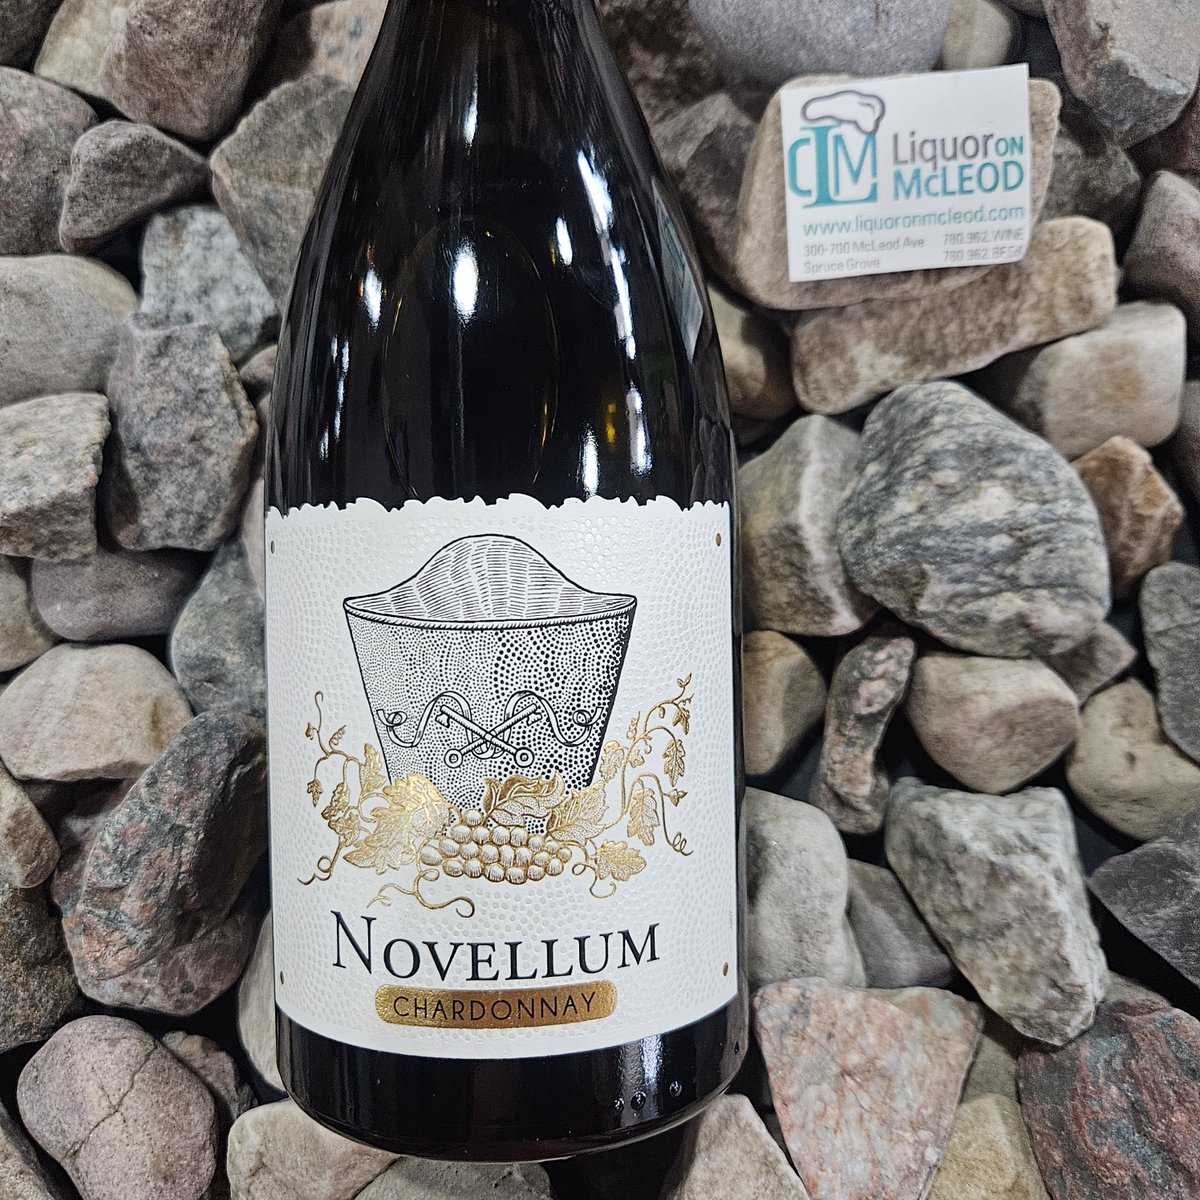 Novellum Chardonnay is full-bodied, rich, round, mouth-coating, and generous yet with a decent sense of balance. Peach, pineapple, and gentle oak shadings all make appearances.

#sprucegrove #stonyplain #liququoronmcleod #whitewine